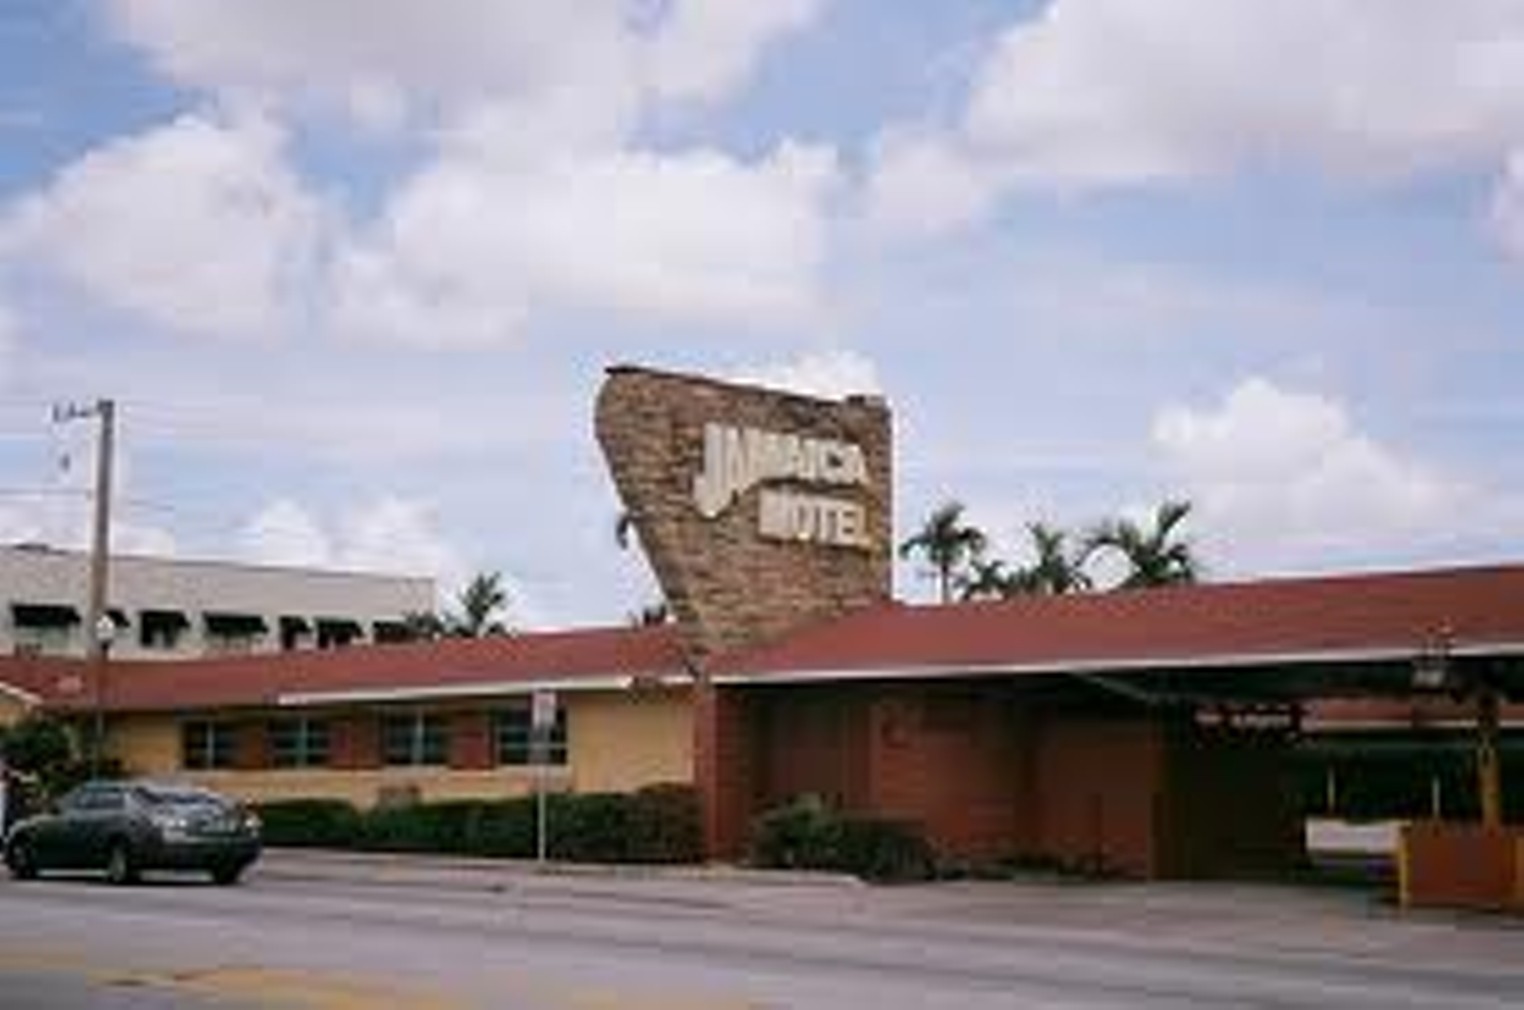 Best Hotel 2008 Jamaica Motel Best Restaurants, Bars, Clubs, Music and Stores in Miami Miami New Times pic image